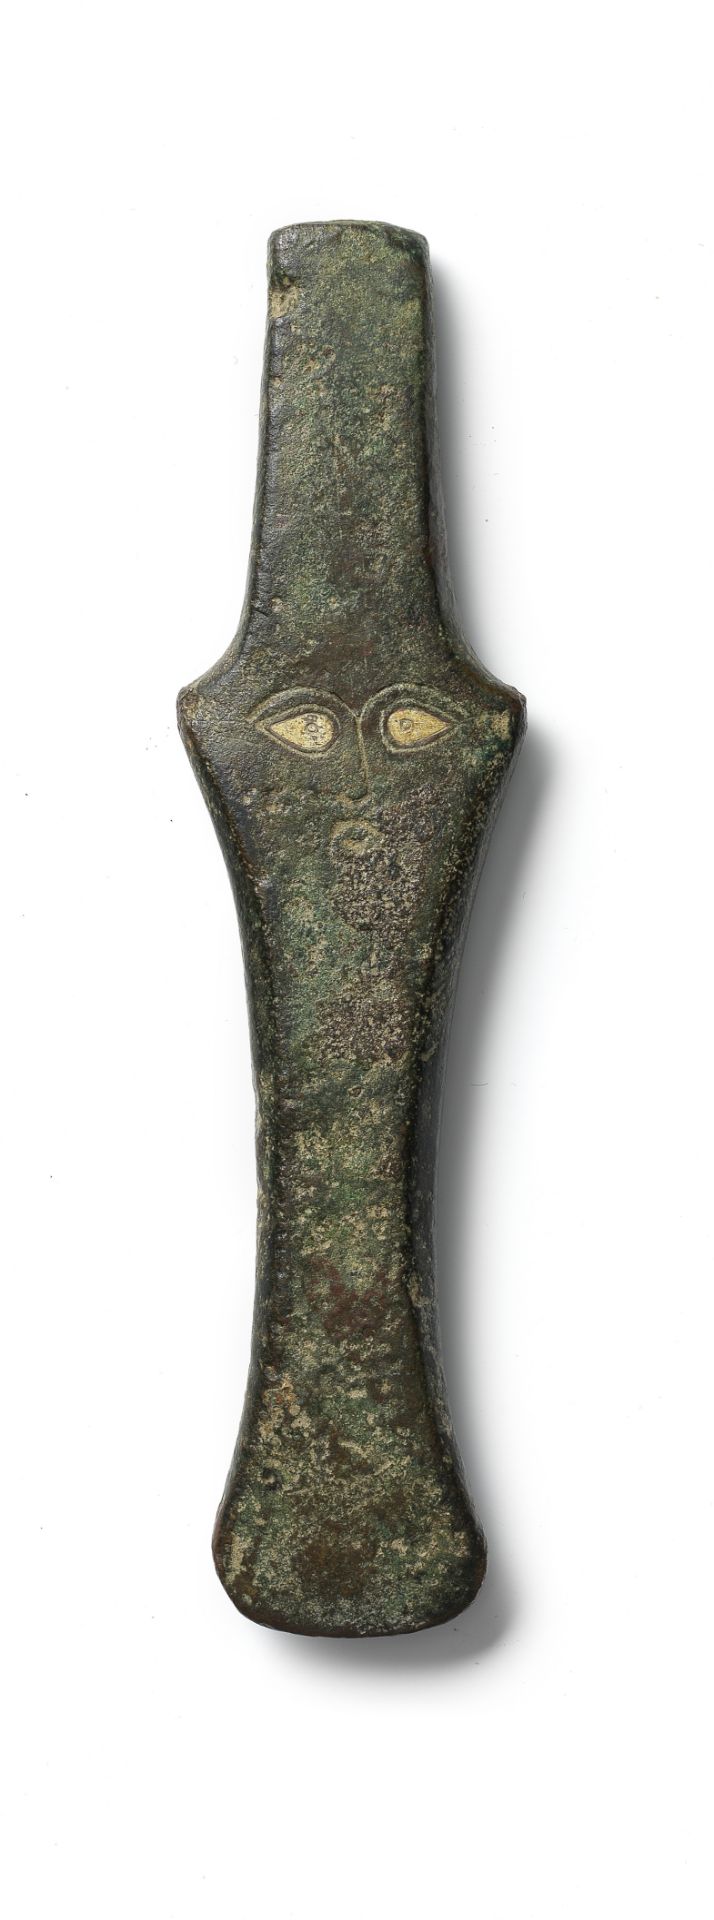 A Near Eastern bronze lugged anthropomorphic axe head with inlaid eyes